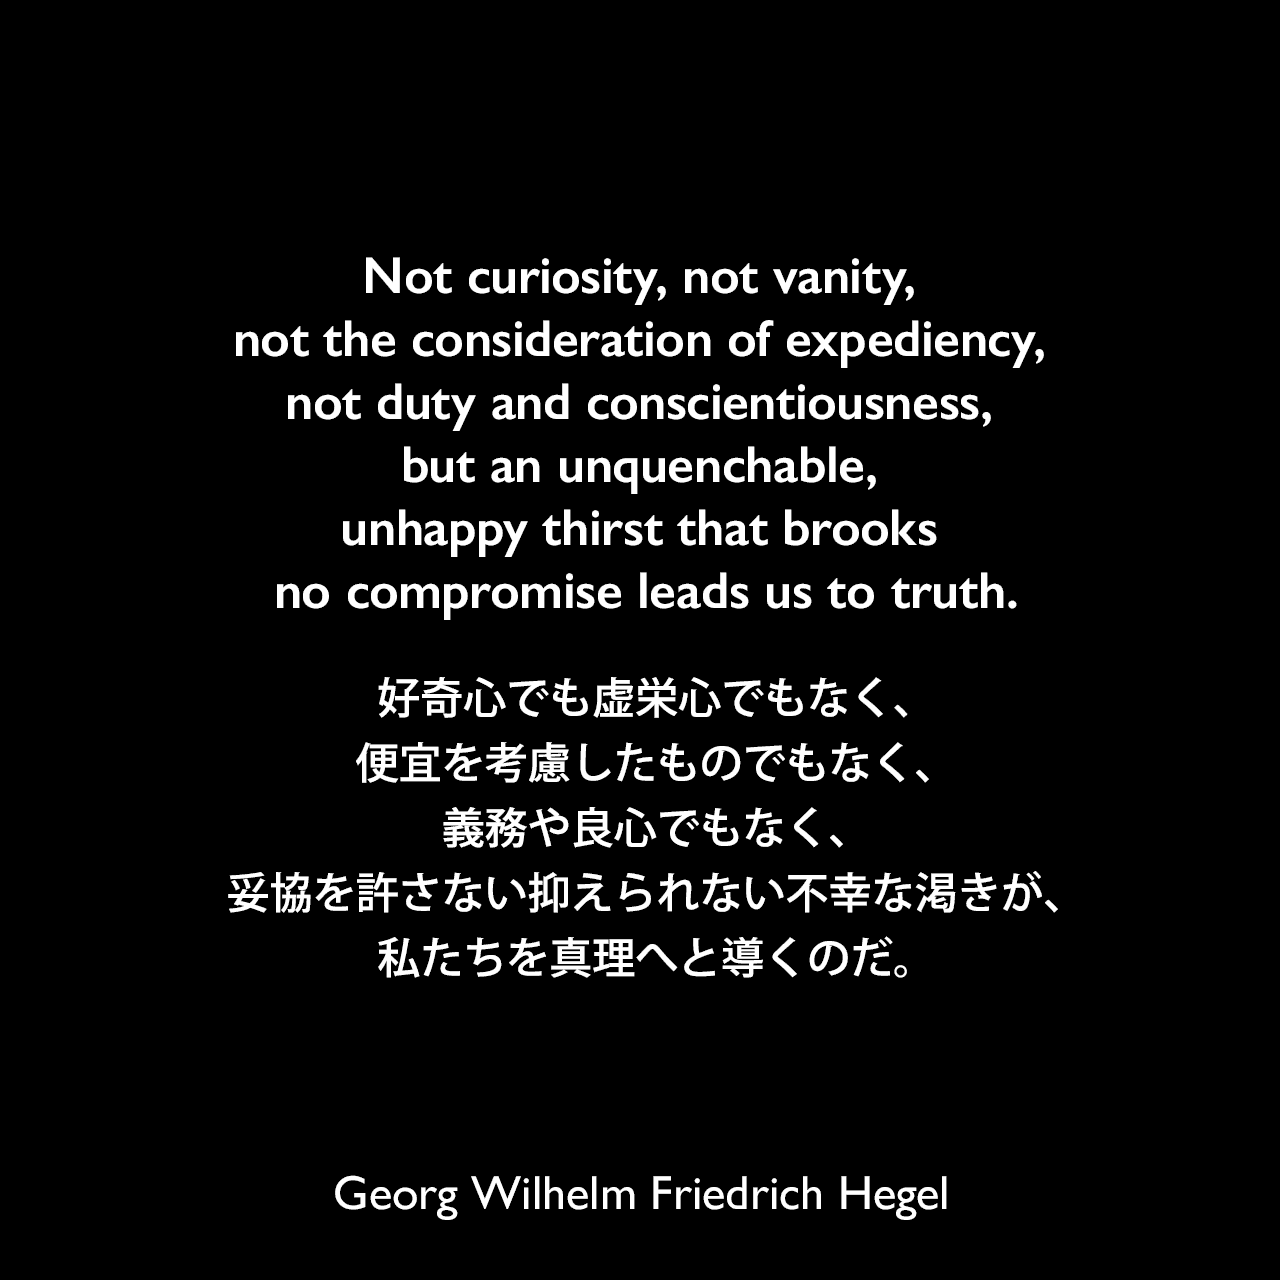 Not curiosity, not vanity, not the consideration of expediency, not duty and conscientiousness, but an unquenchable, unhappy thirst that brooks no compromise leads us to truth.好奇心でも虚栄心でもなく、便宜を考慮したものでもなく、義務や良心でもなく、妥協を許さない抑えられない不幸な渇きが、私たちを真理へと導くのだ。Georg Wilhelm Friedrich Hegel